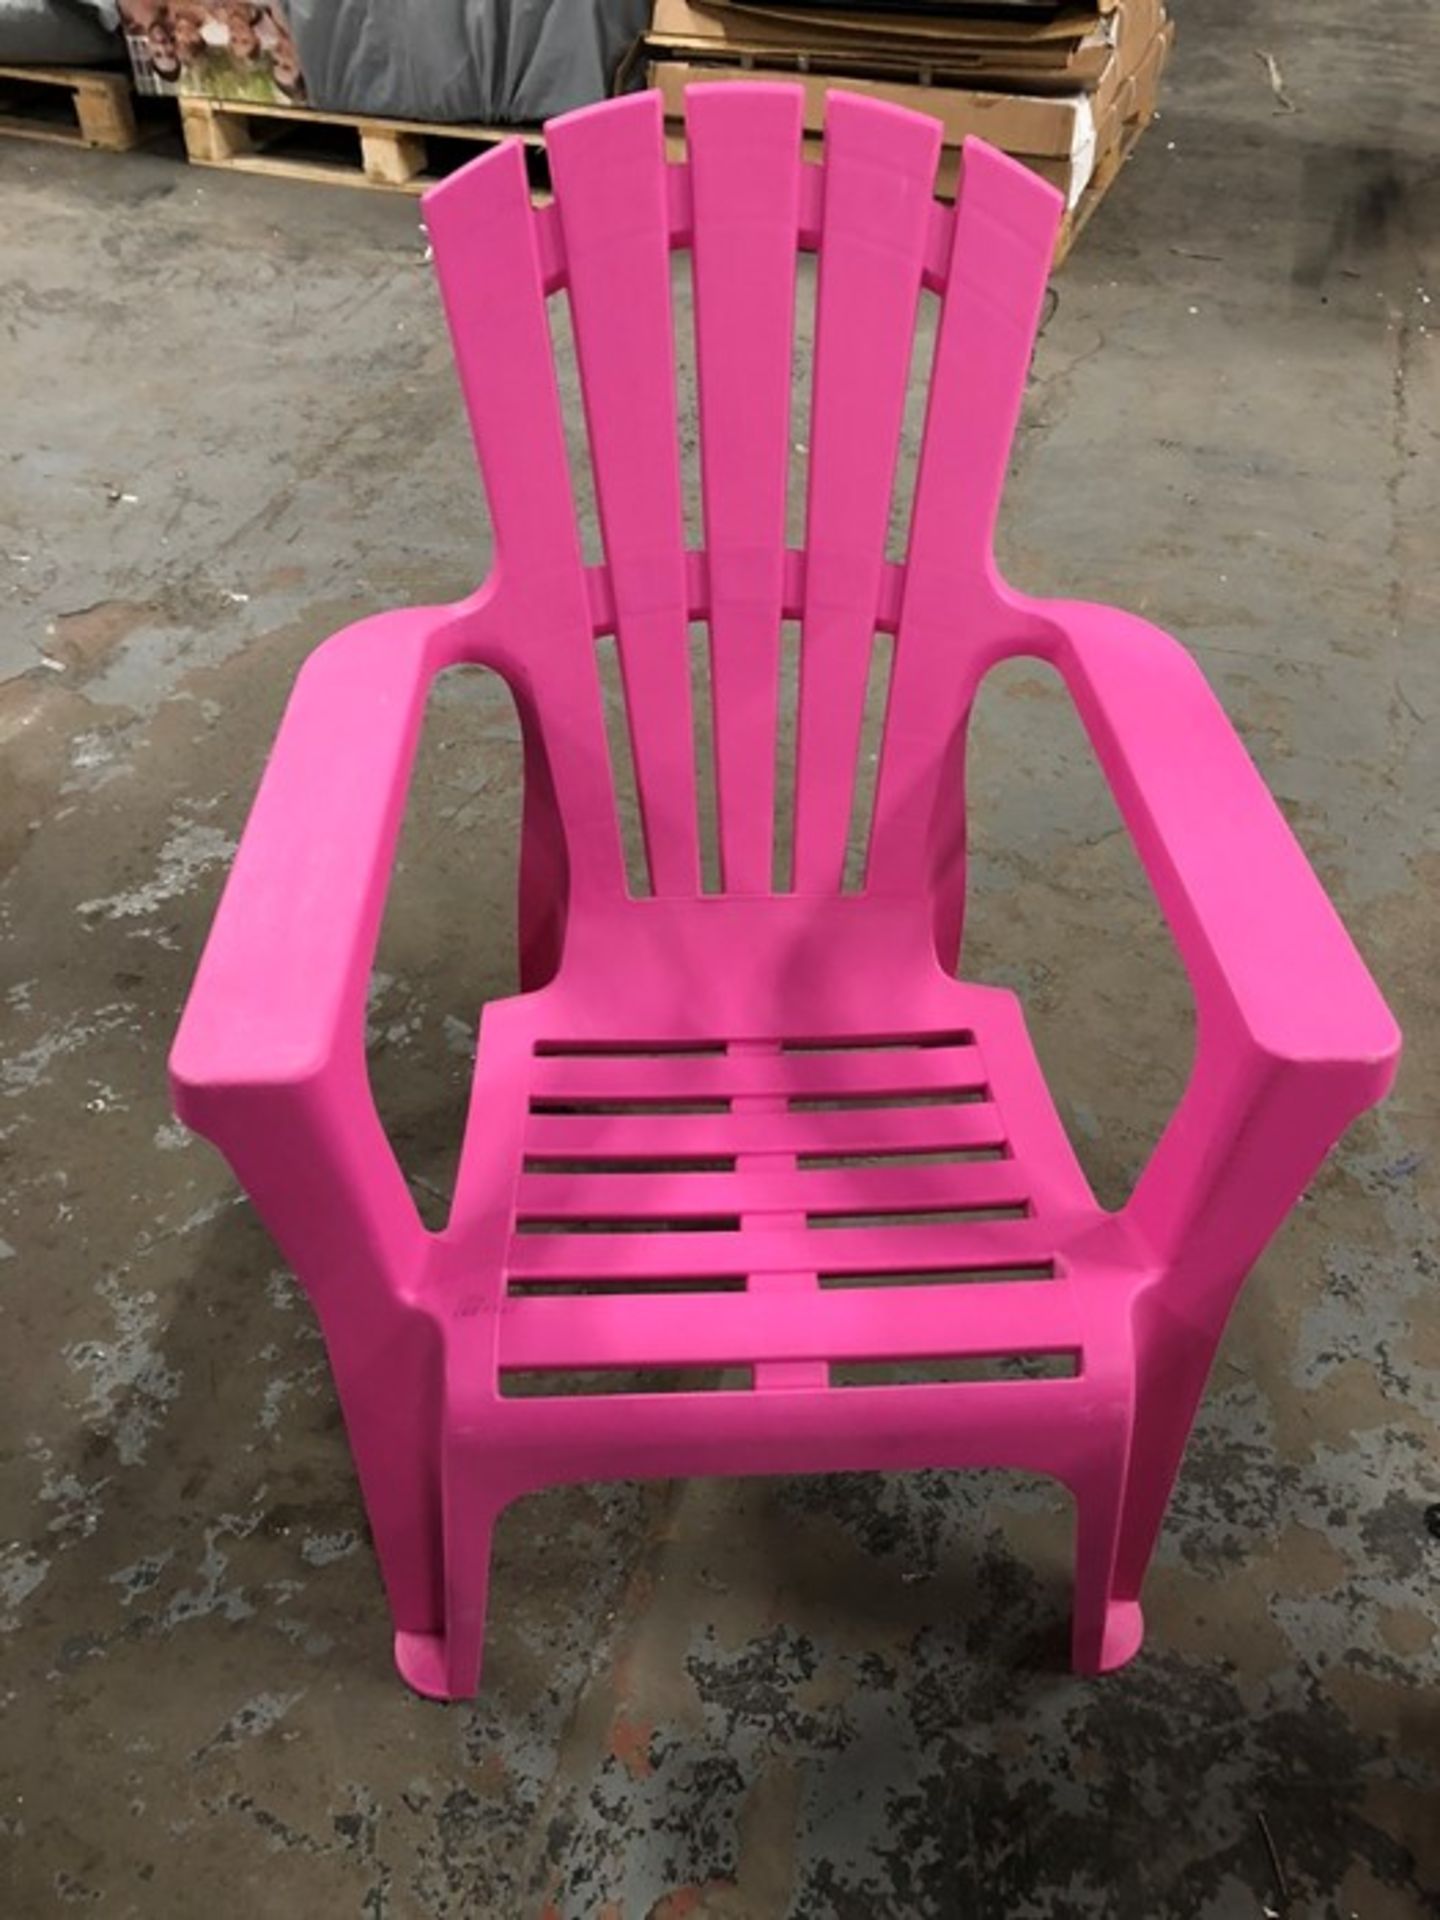 1 PLASTIC GARDEN CHAIR IN PINK (PUBLIC VIEWING AVAILABLE)